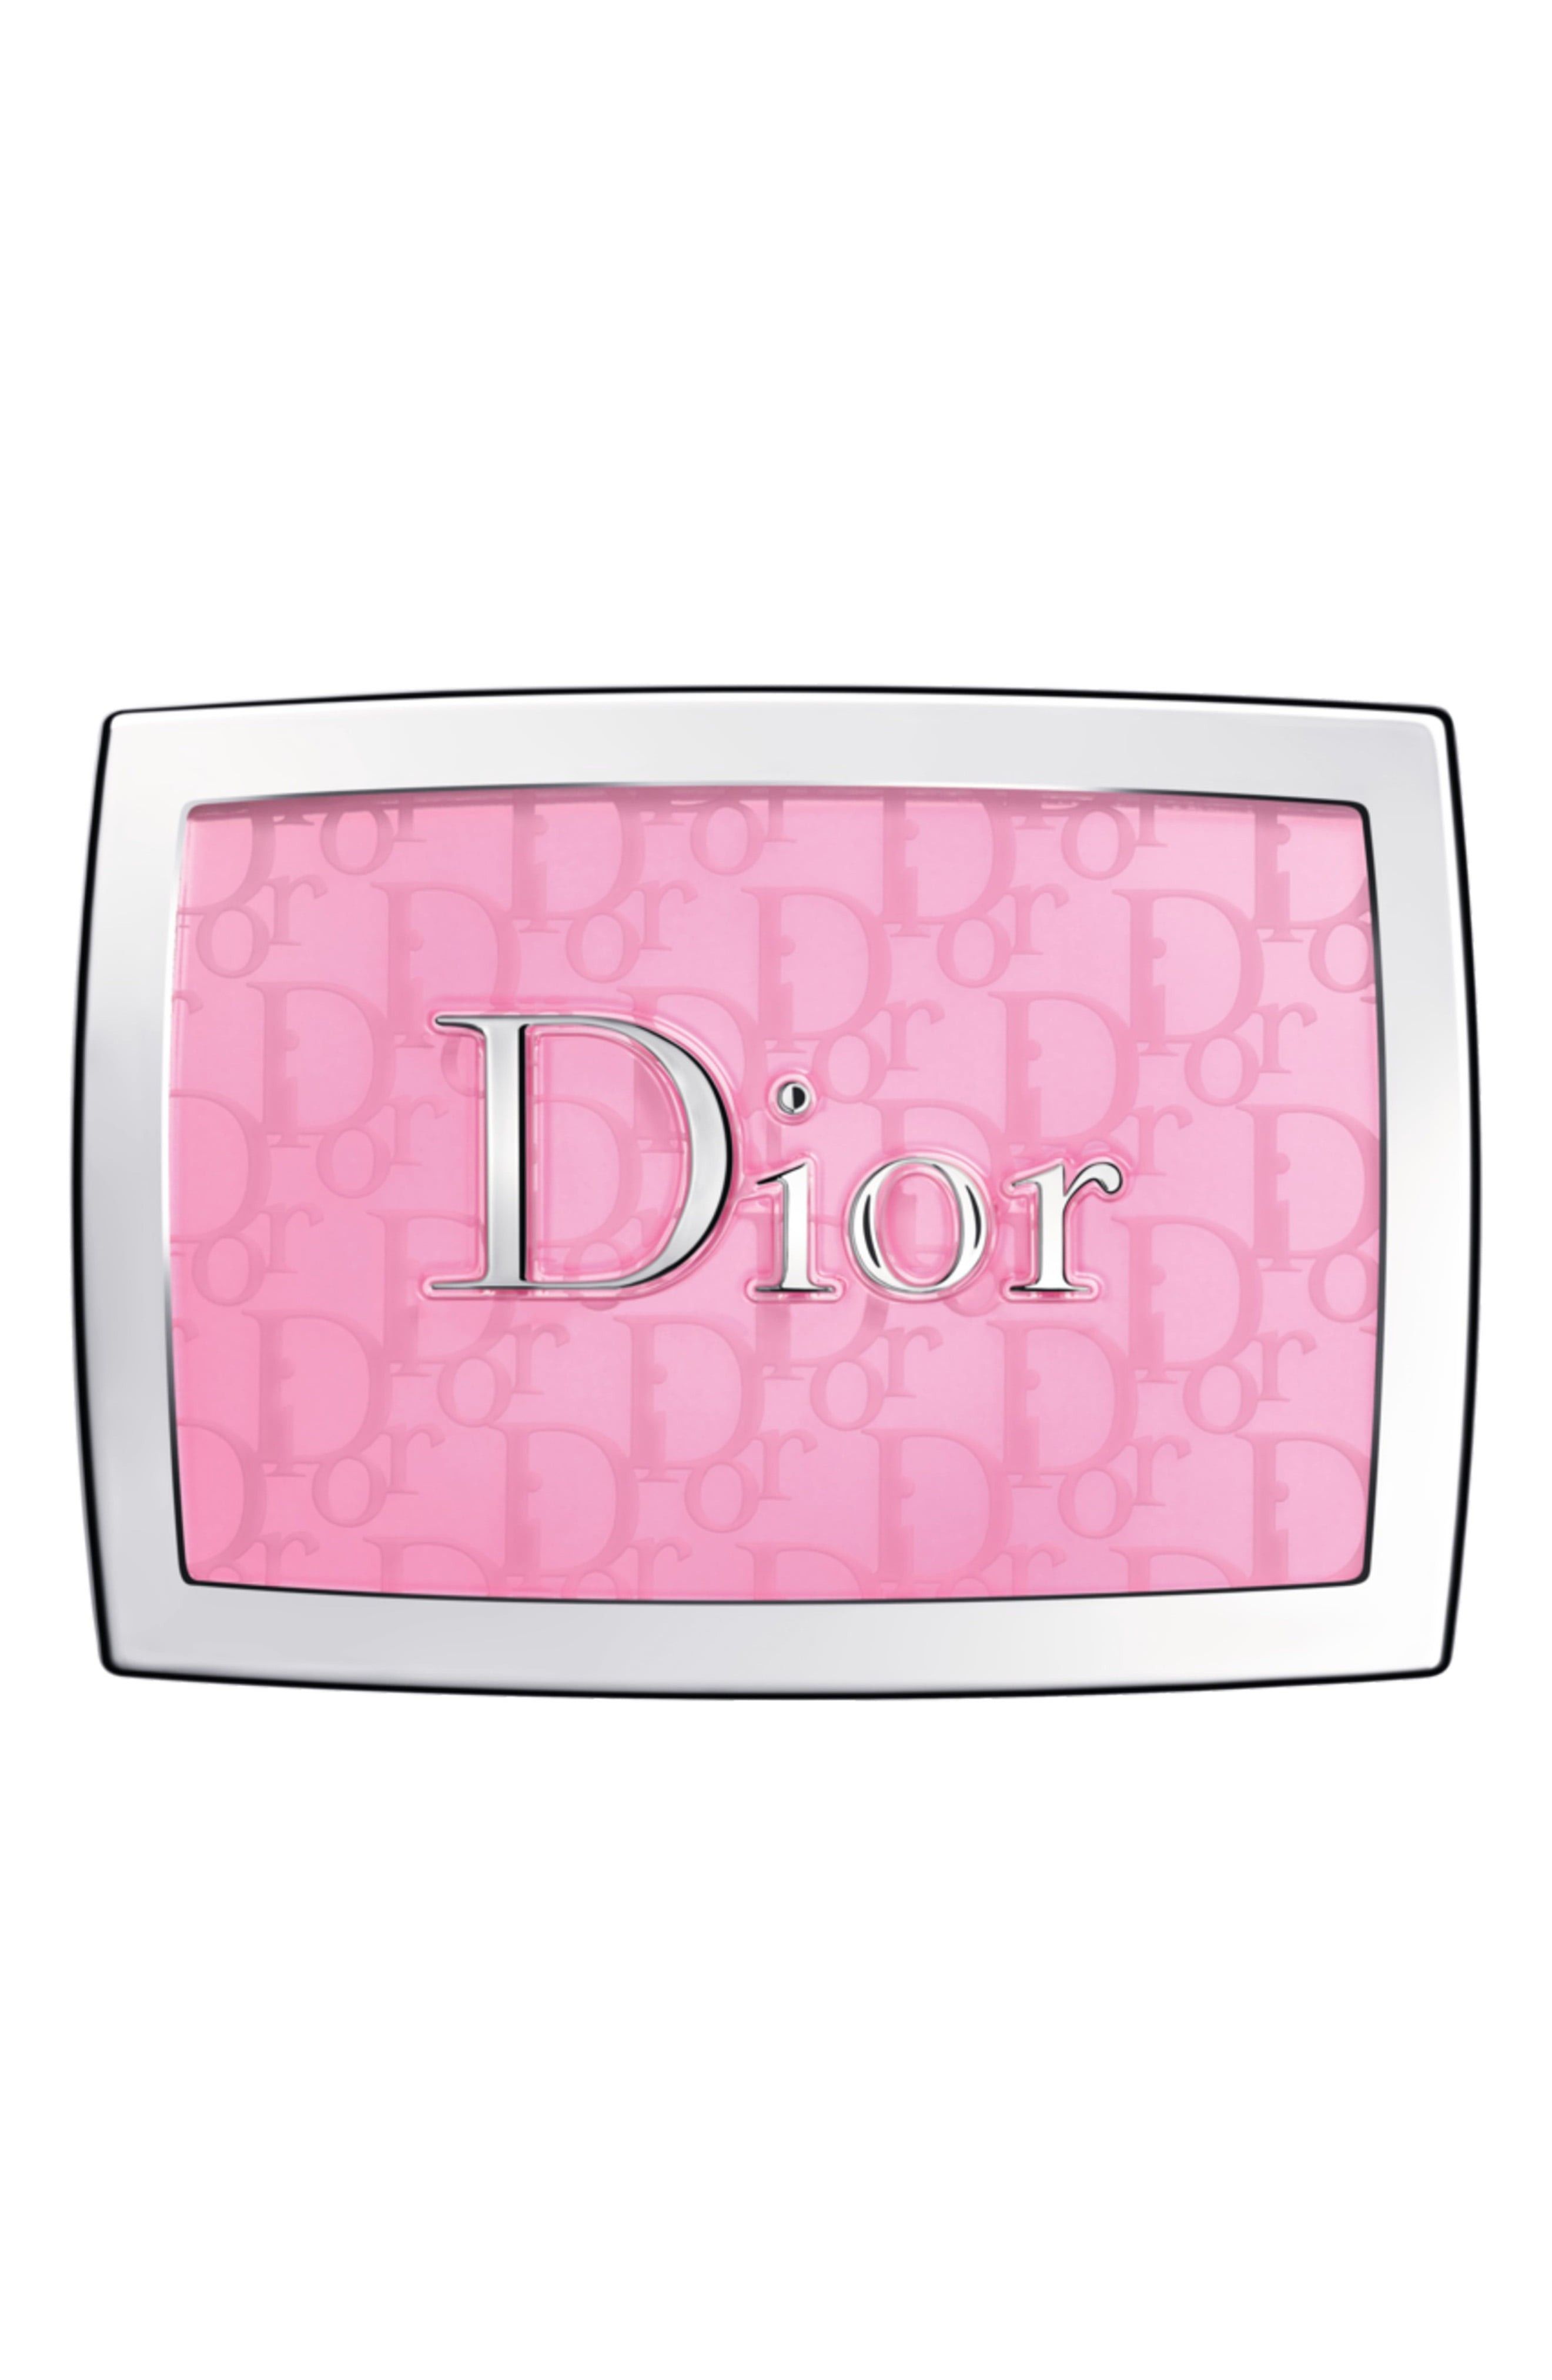 Dior Rosy Glow Blush in 001 Pink at Nordstrom | Nordstrom